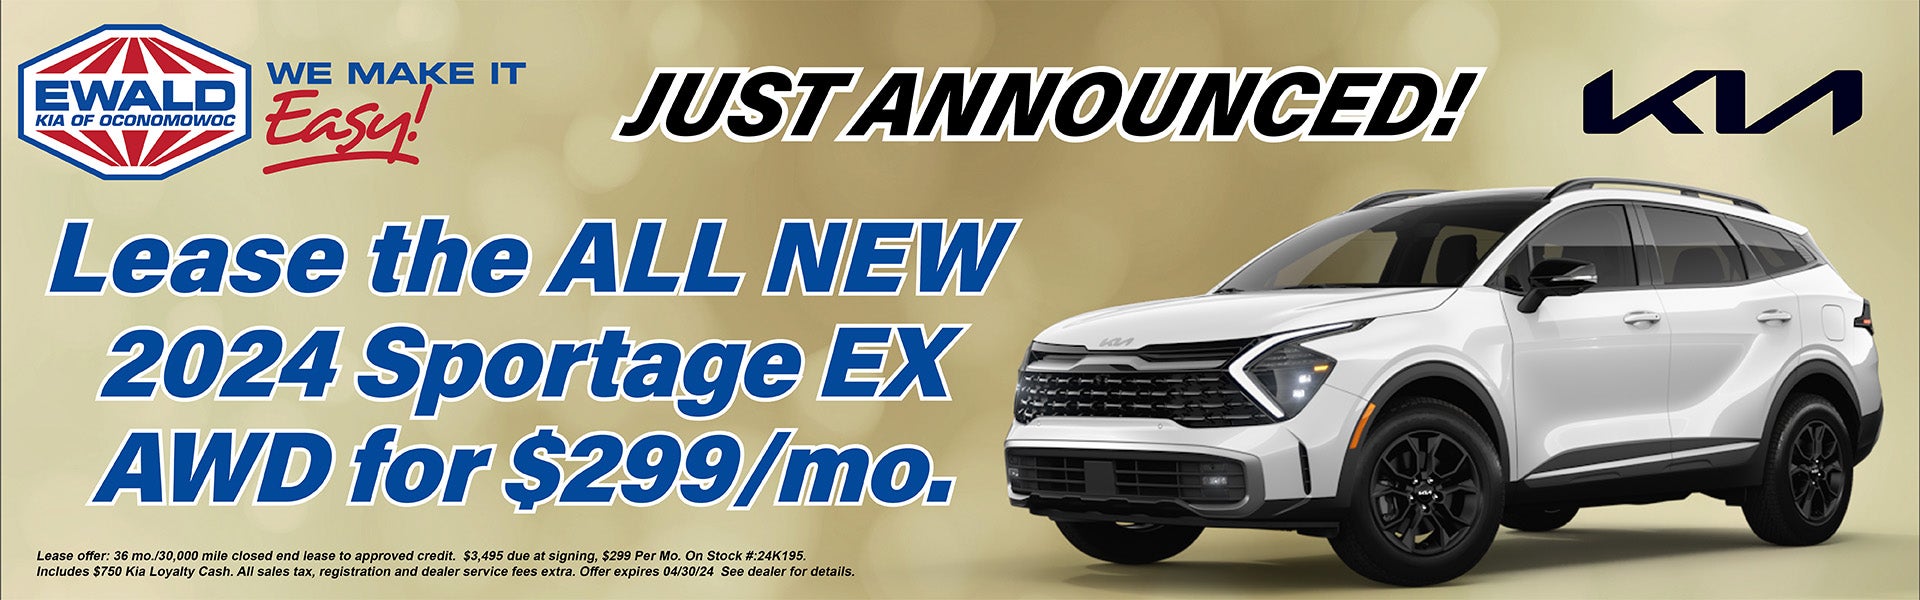 Save on the Sportage EX